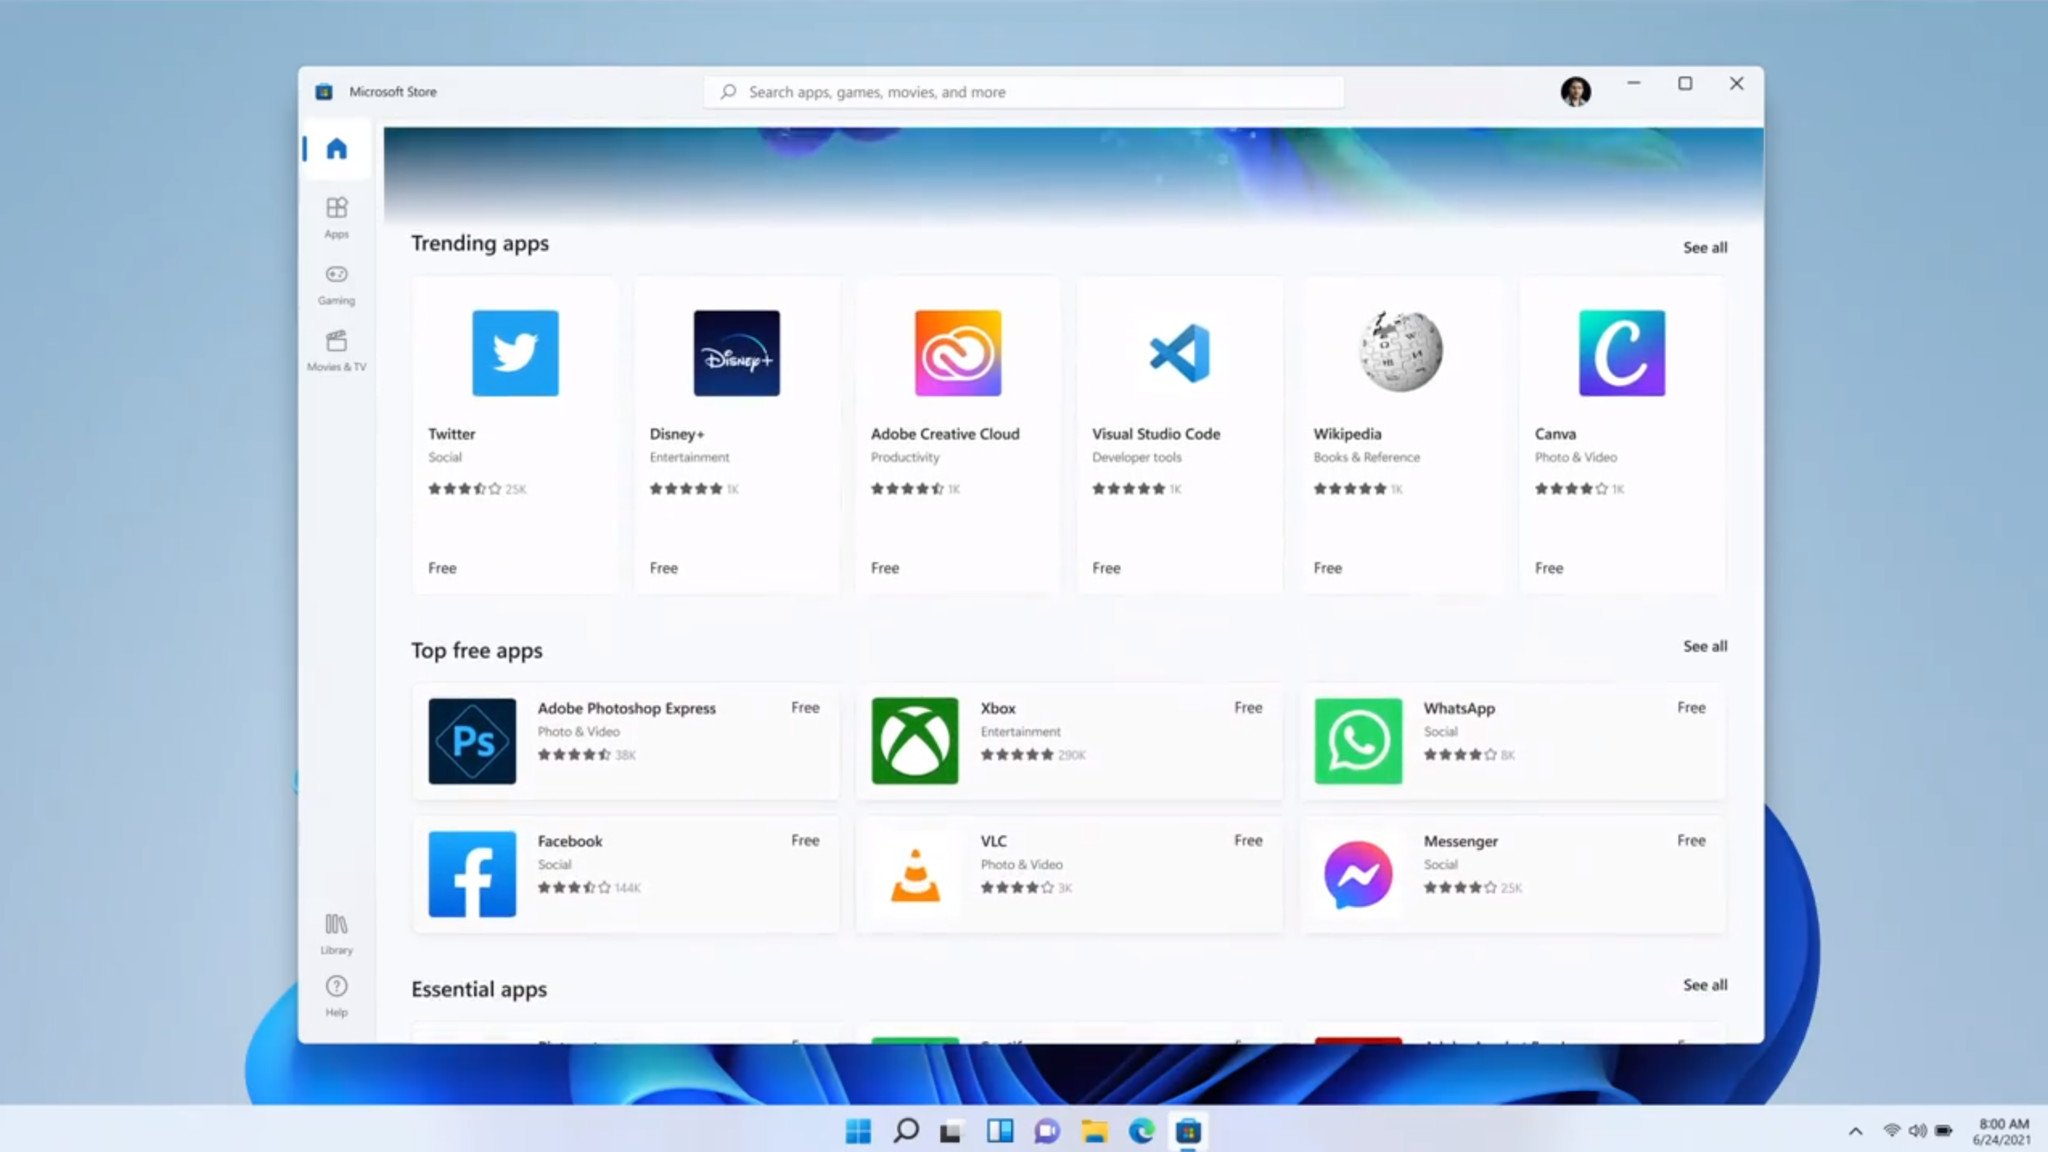 Microsoft Store on Windows to allow third-party storefront apps